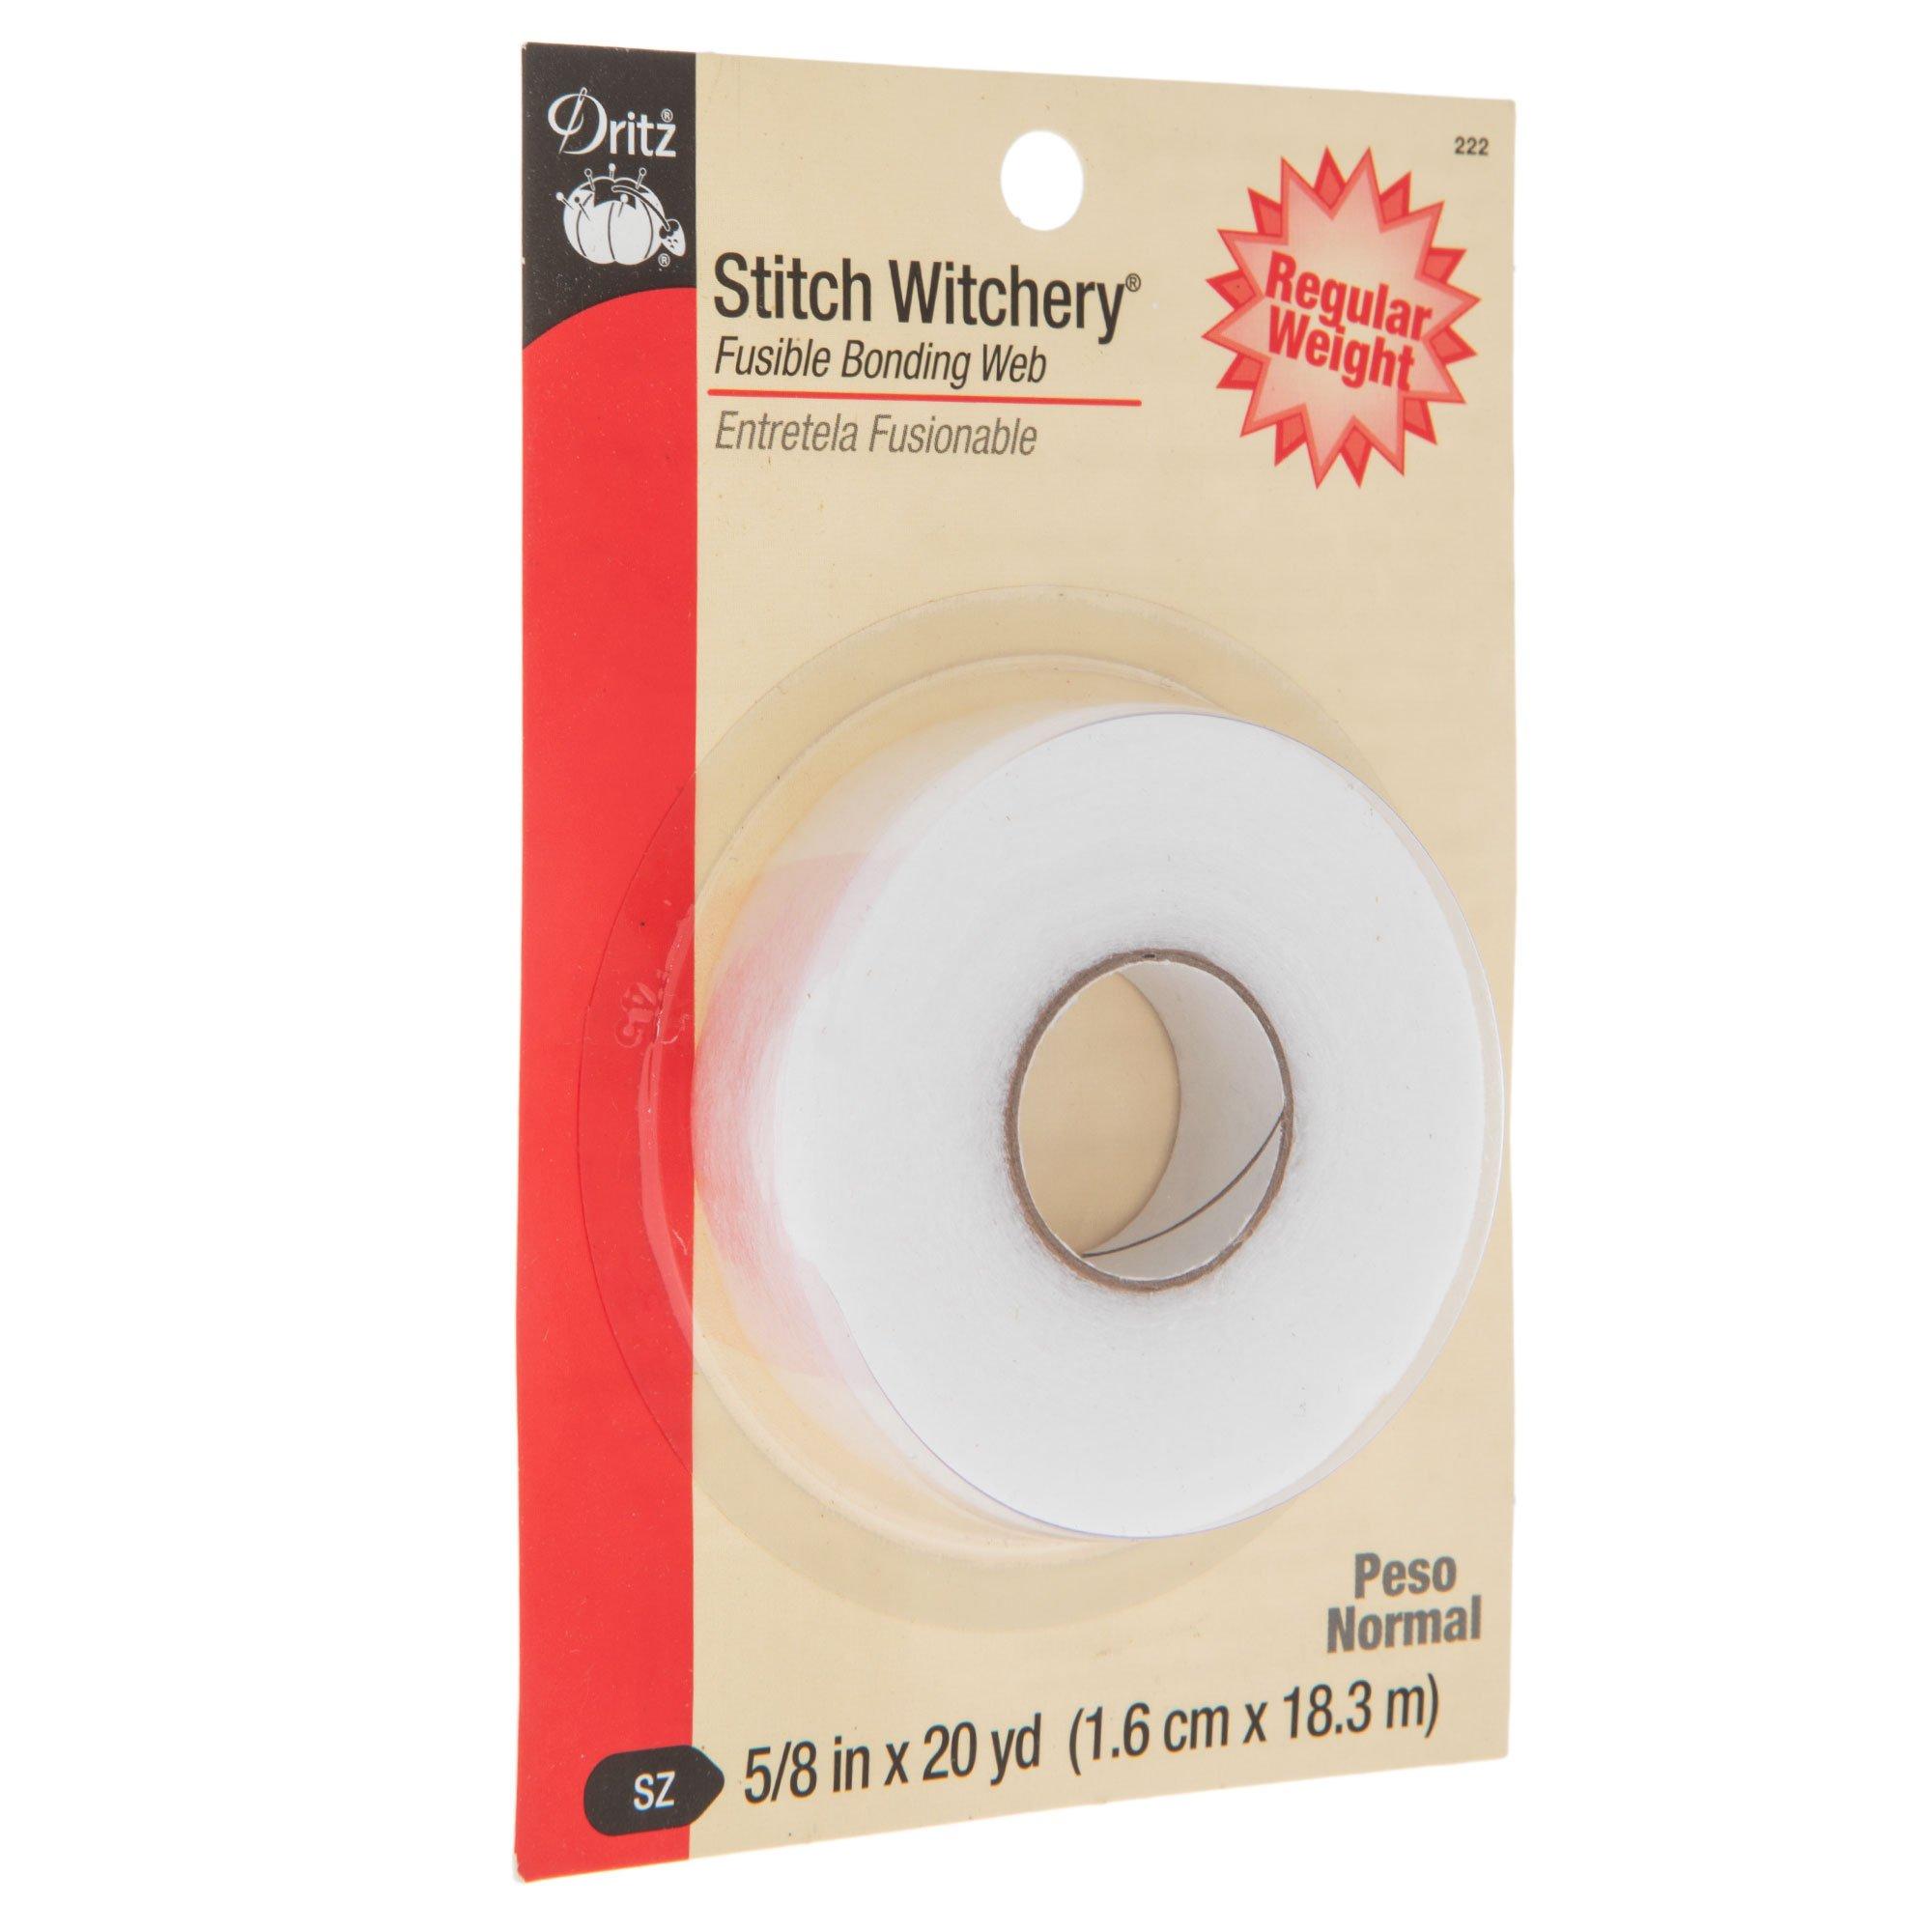 Cesdes Bundle Stitch Witchery Ultra and Regular Fusible Bonding Tapes 5/8' x 20yds (Qty 2)